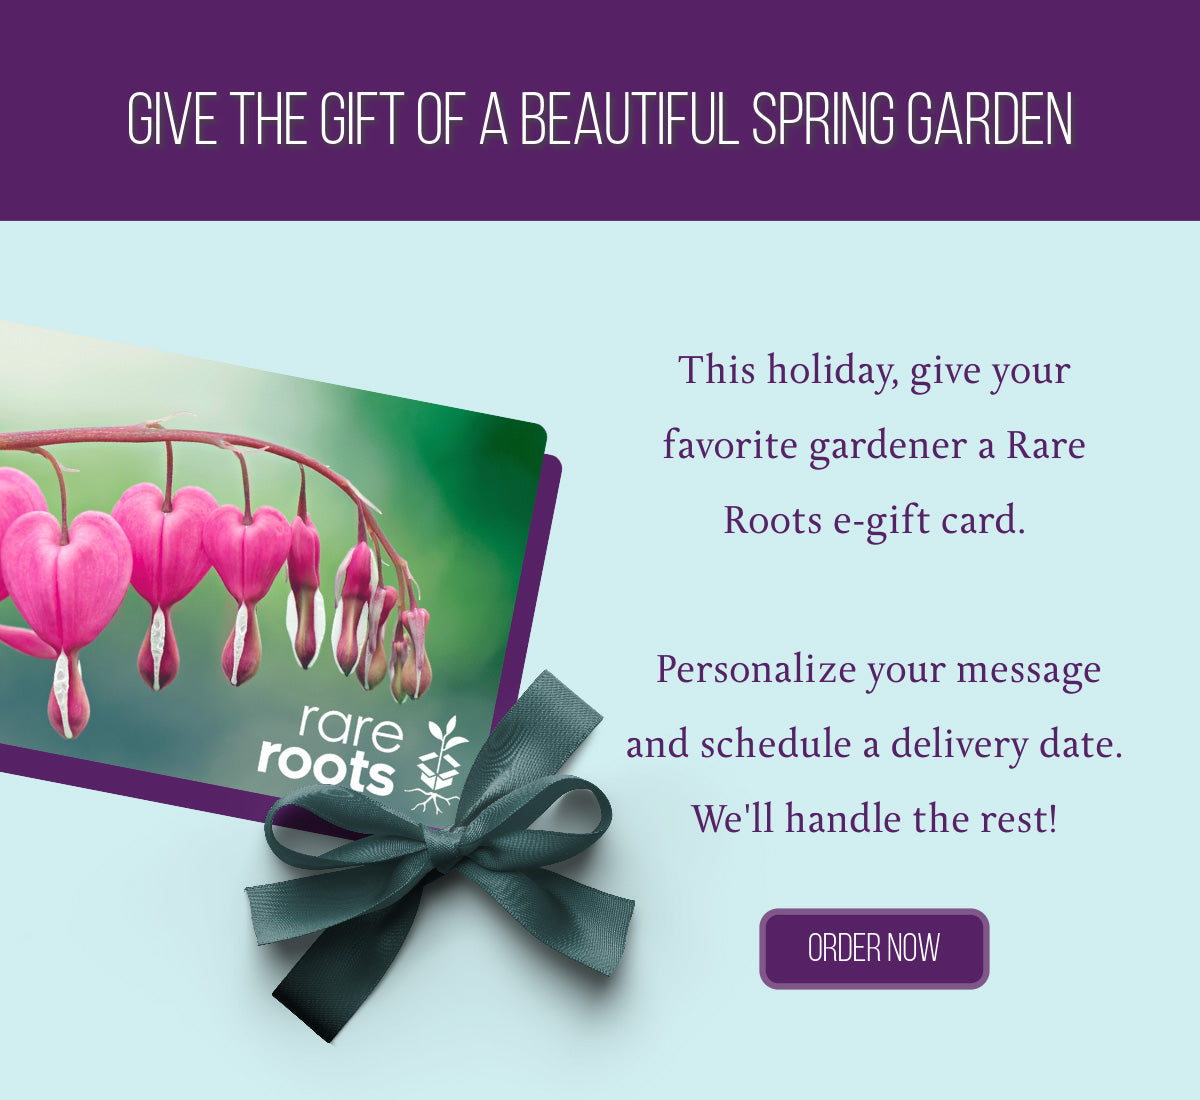 Give the gift of a beautiful spring garden. This holiday give your favorite gardener a Rare Roots electronic gift card. Personalize your message and schedule a delivery date. We'll handle the rest.